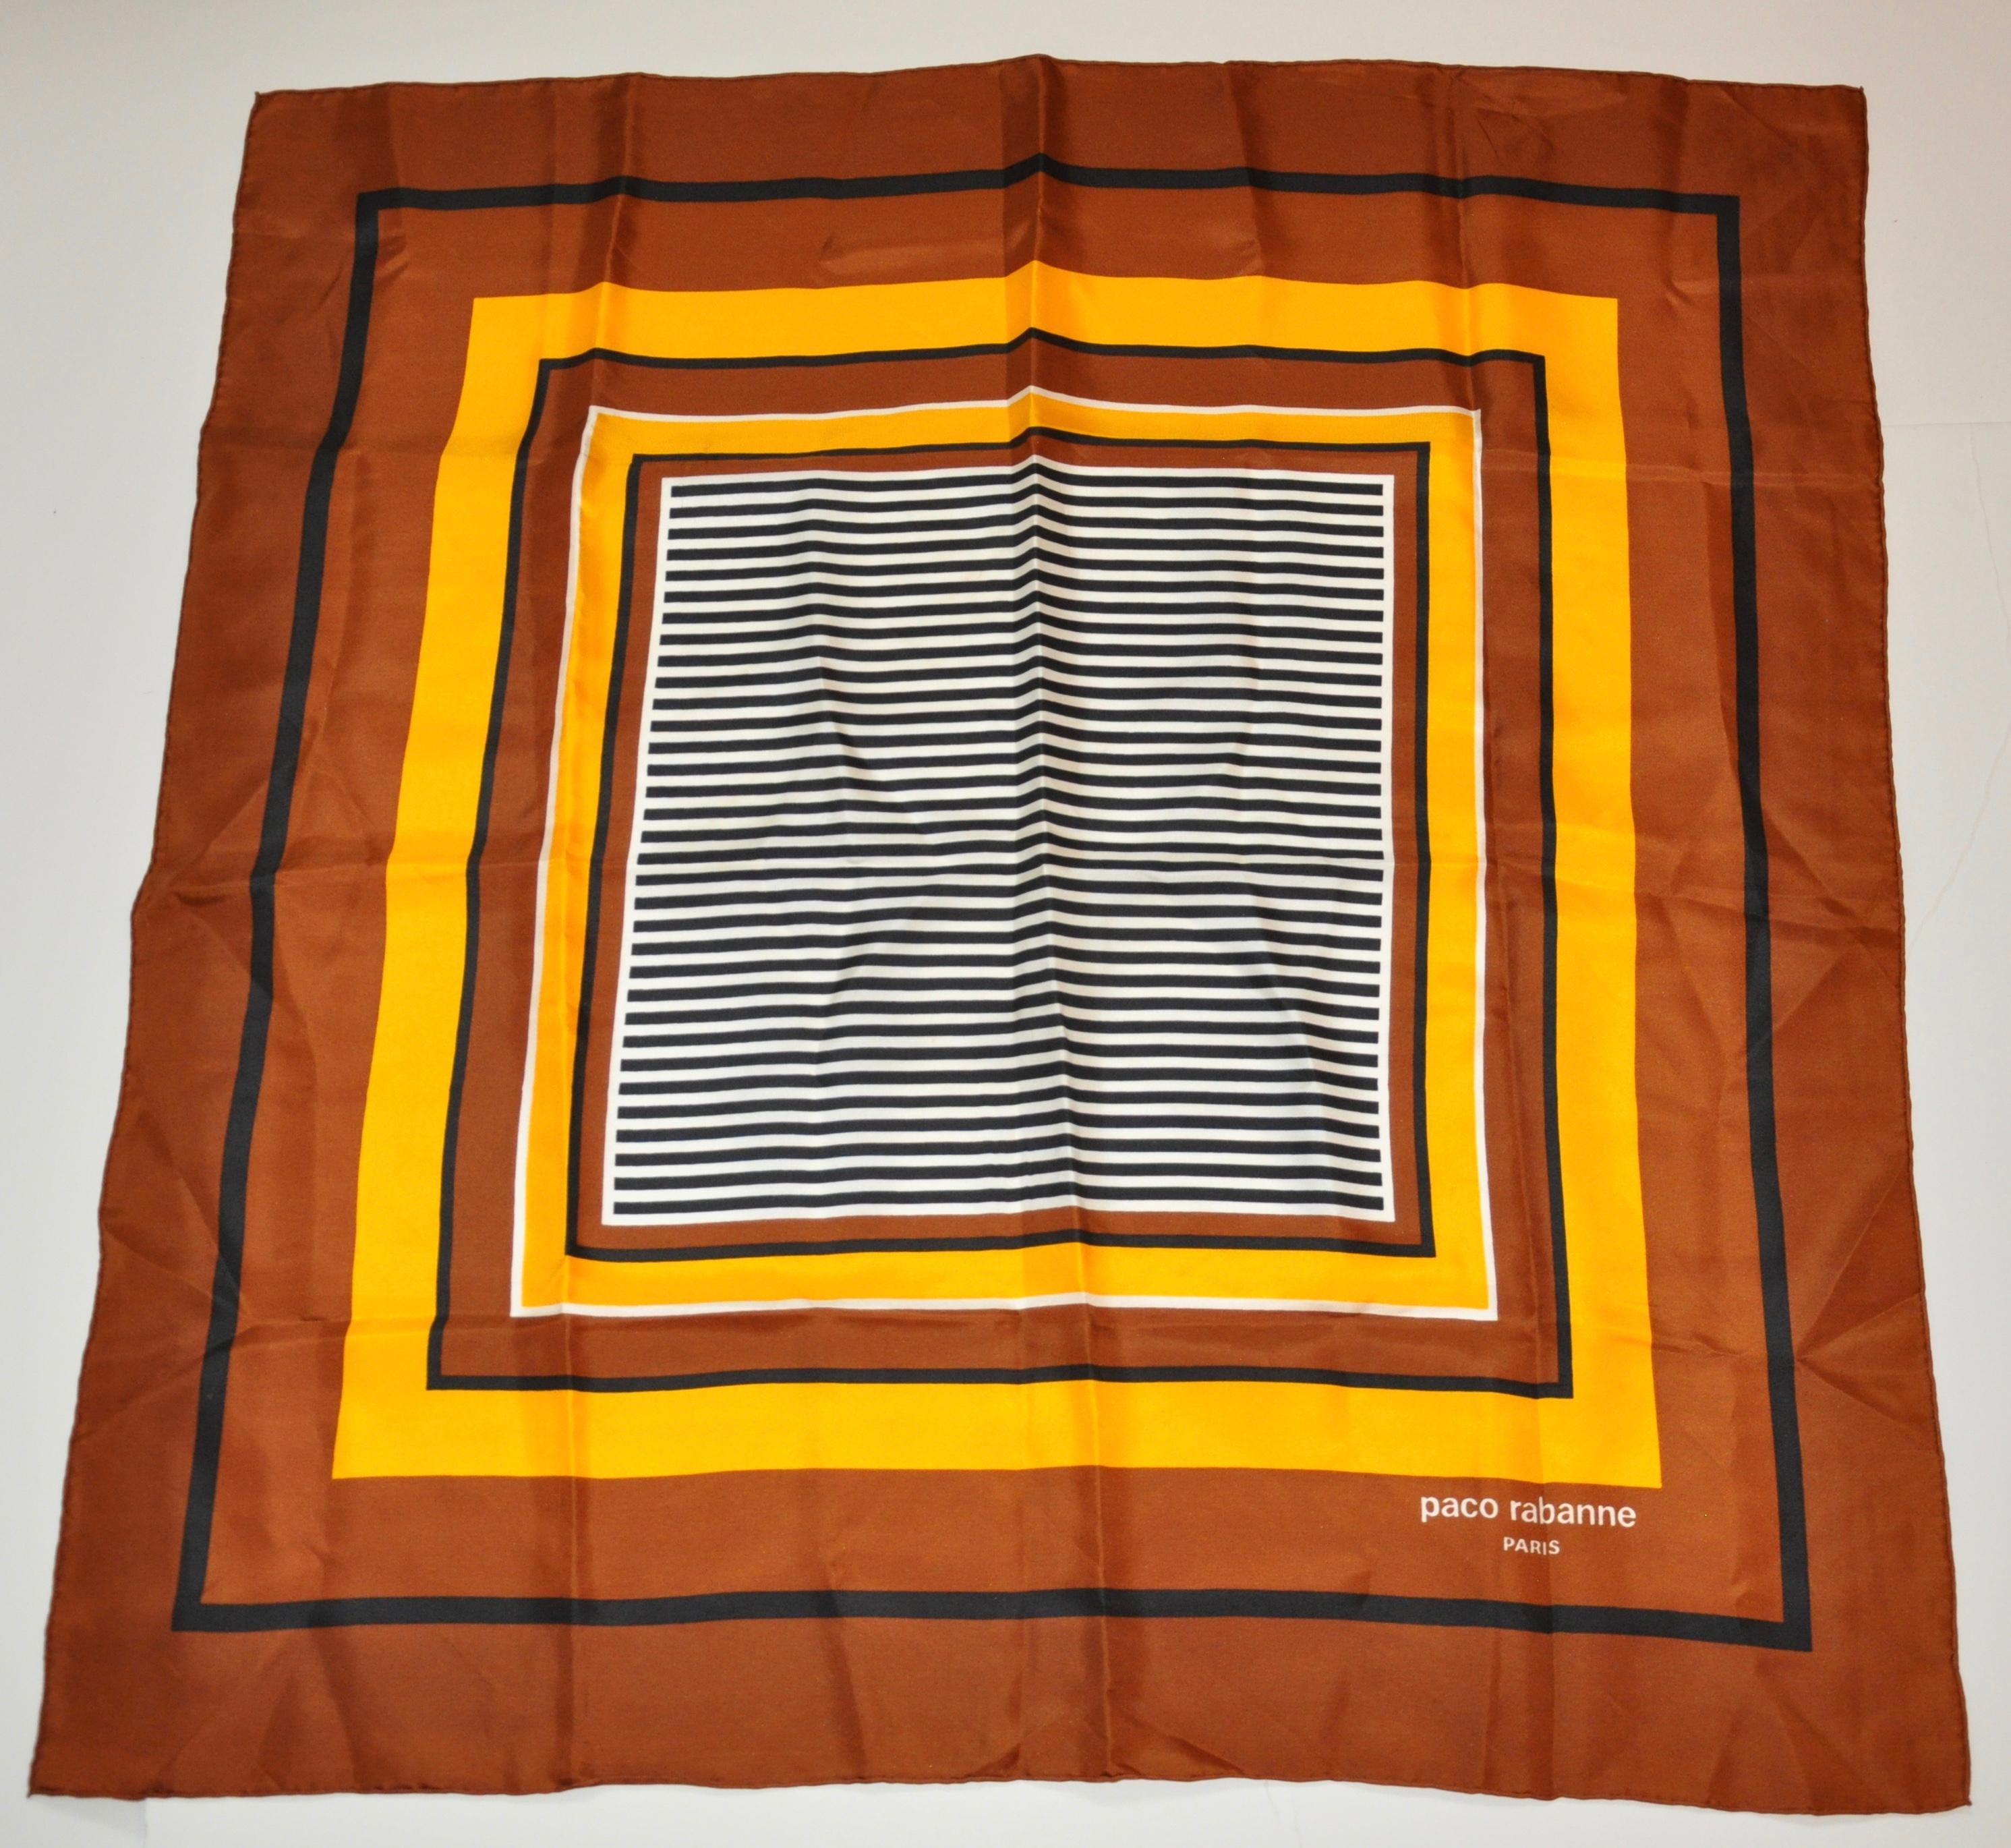      Paco Rabanne wonderfully rich shades of browns and yellow accented with black surrounding a striped center silk scarf measures 30 inches by 31 inches. Edges are hand-rolled and made in France.